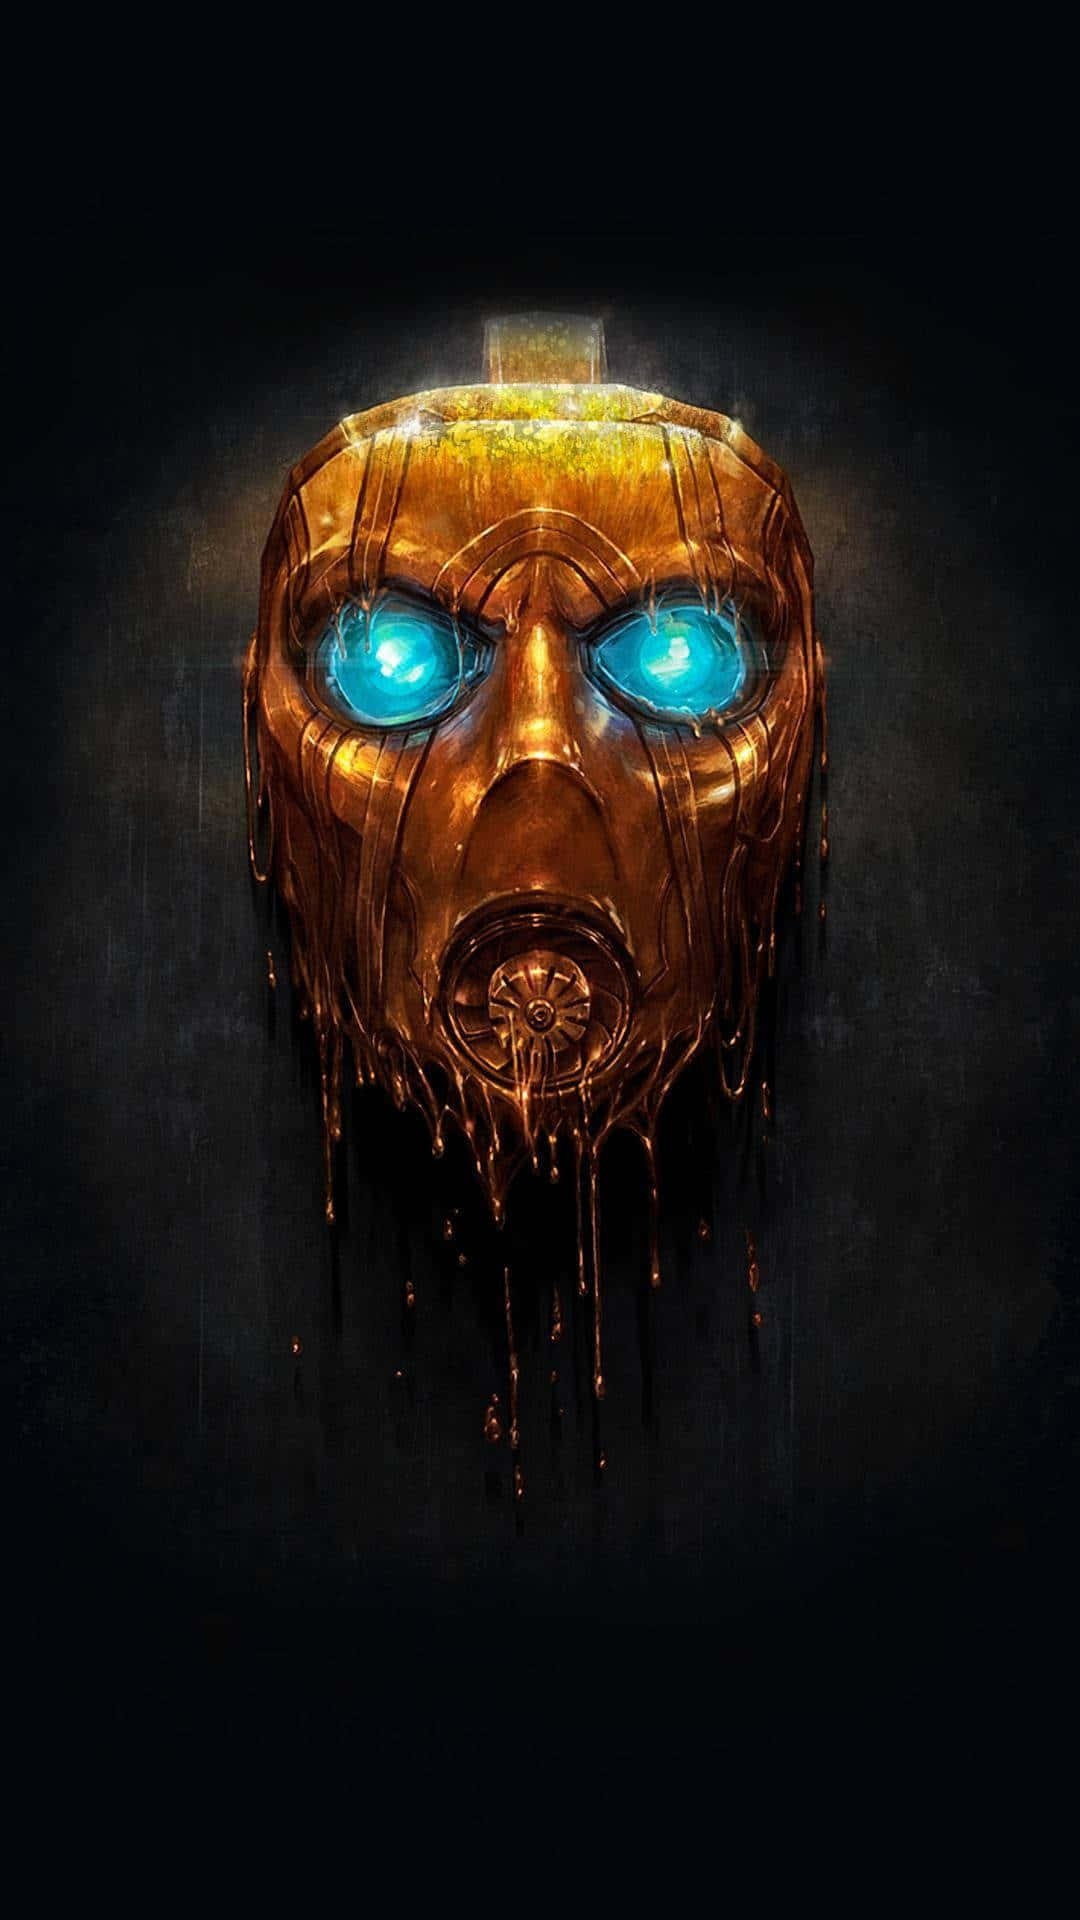 Iconic artwork from the Borderlands game series